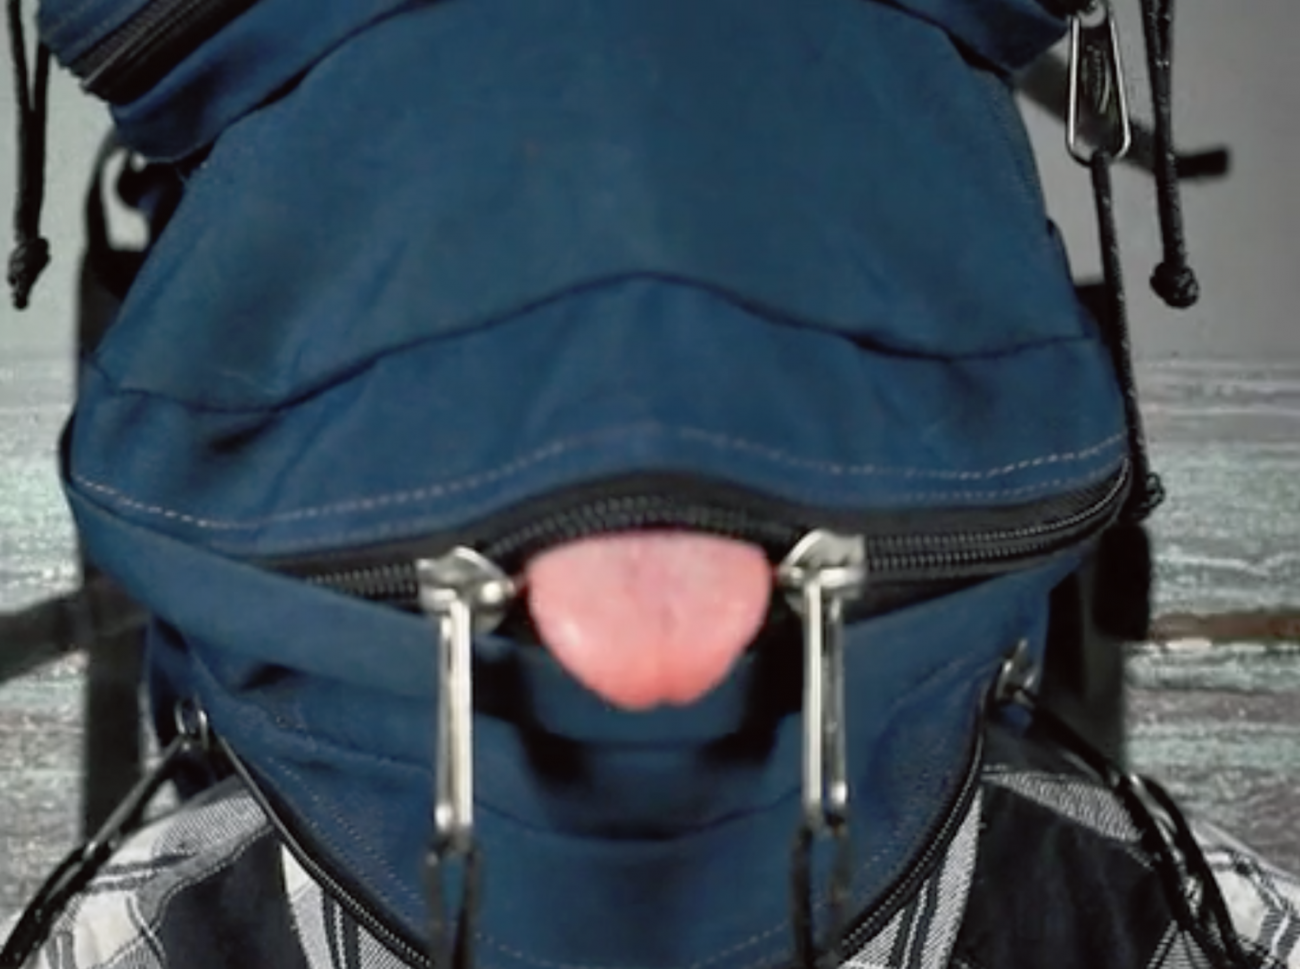 Video still of person wearing navy fabric mask with a slighting unzipped horizontal zipper in the front, the person's tongue is sticking out.